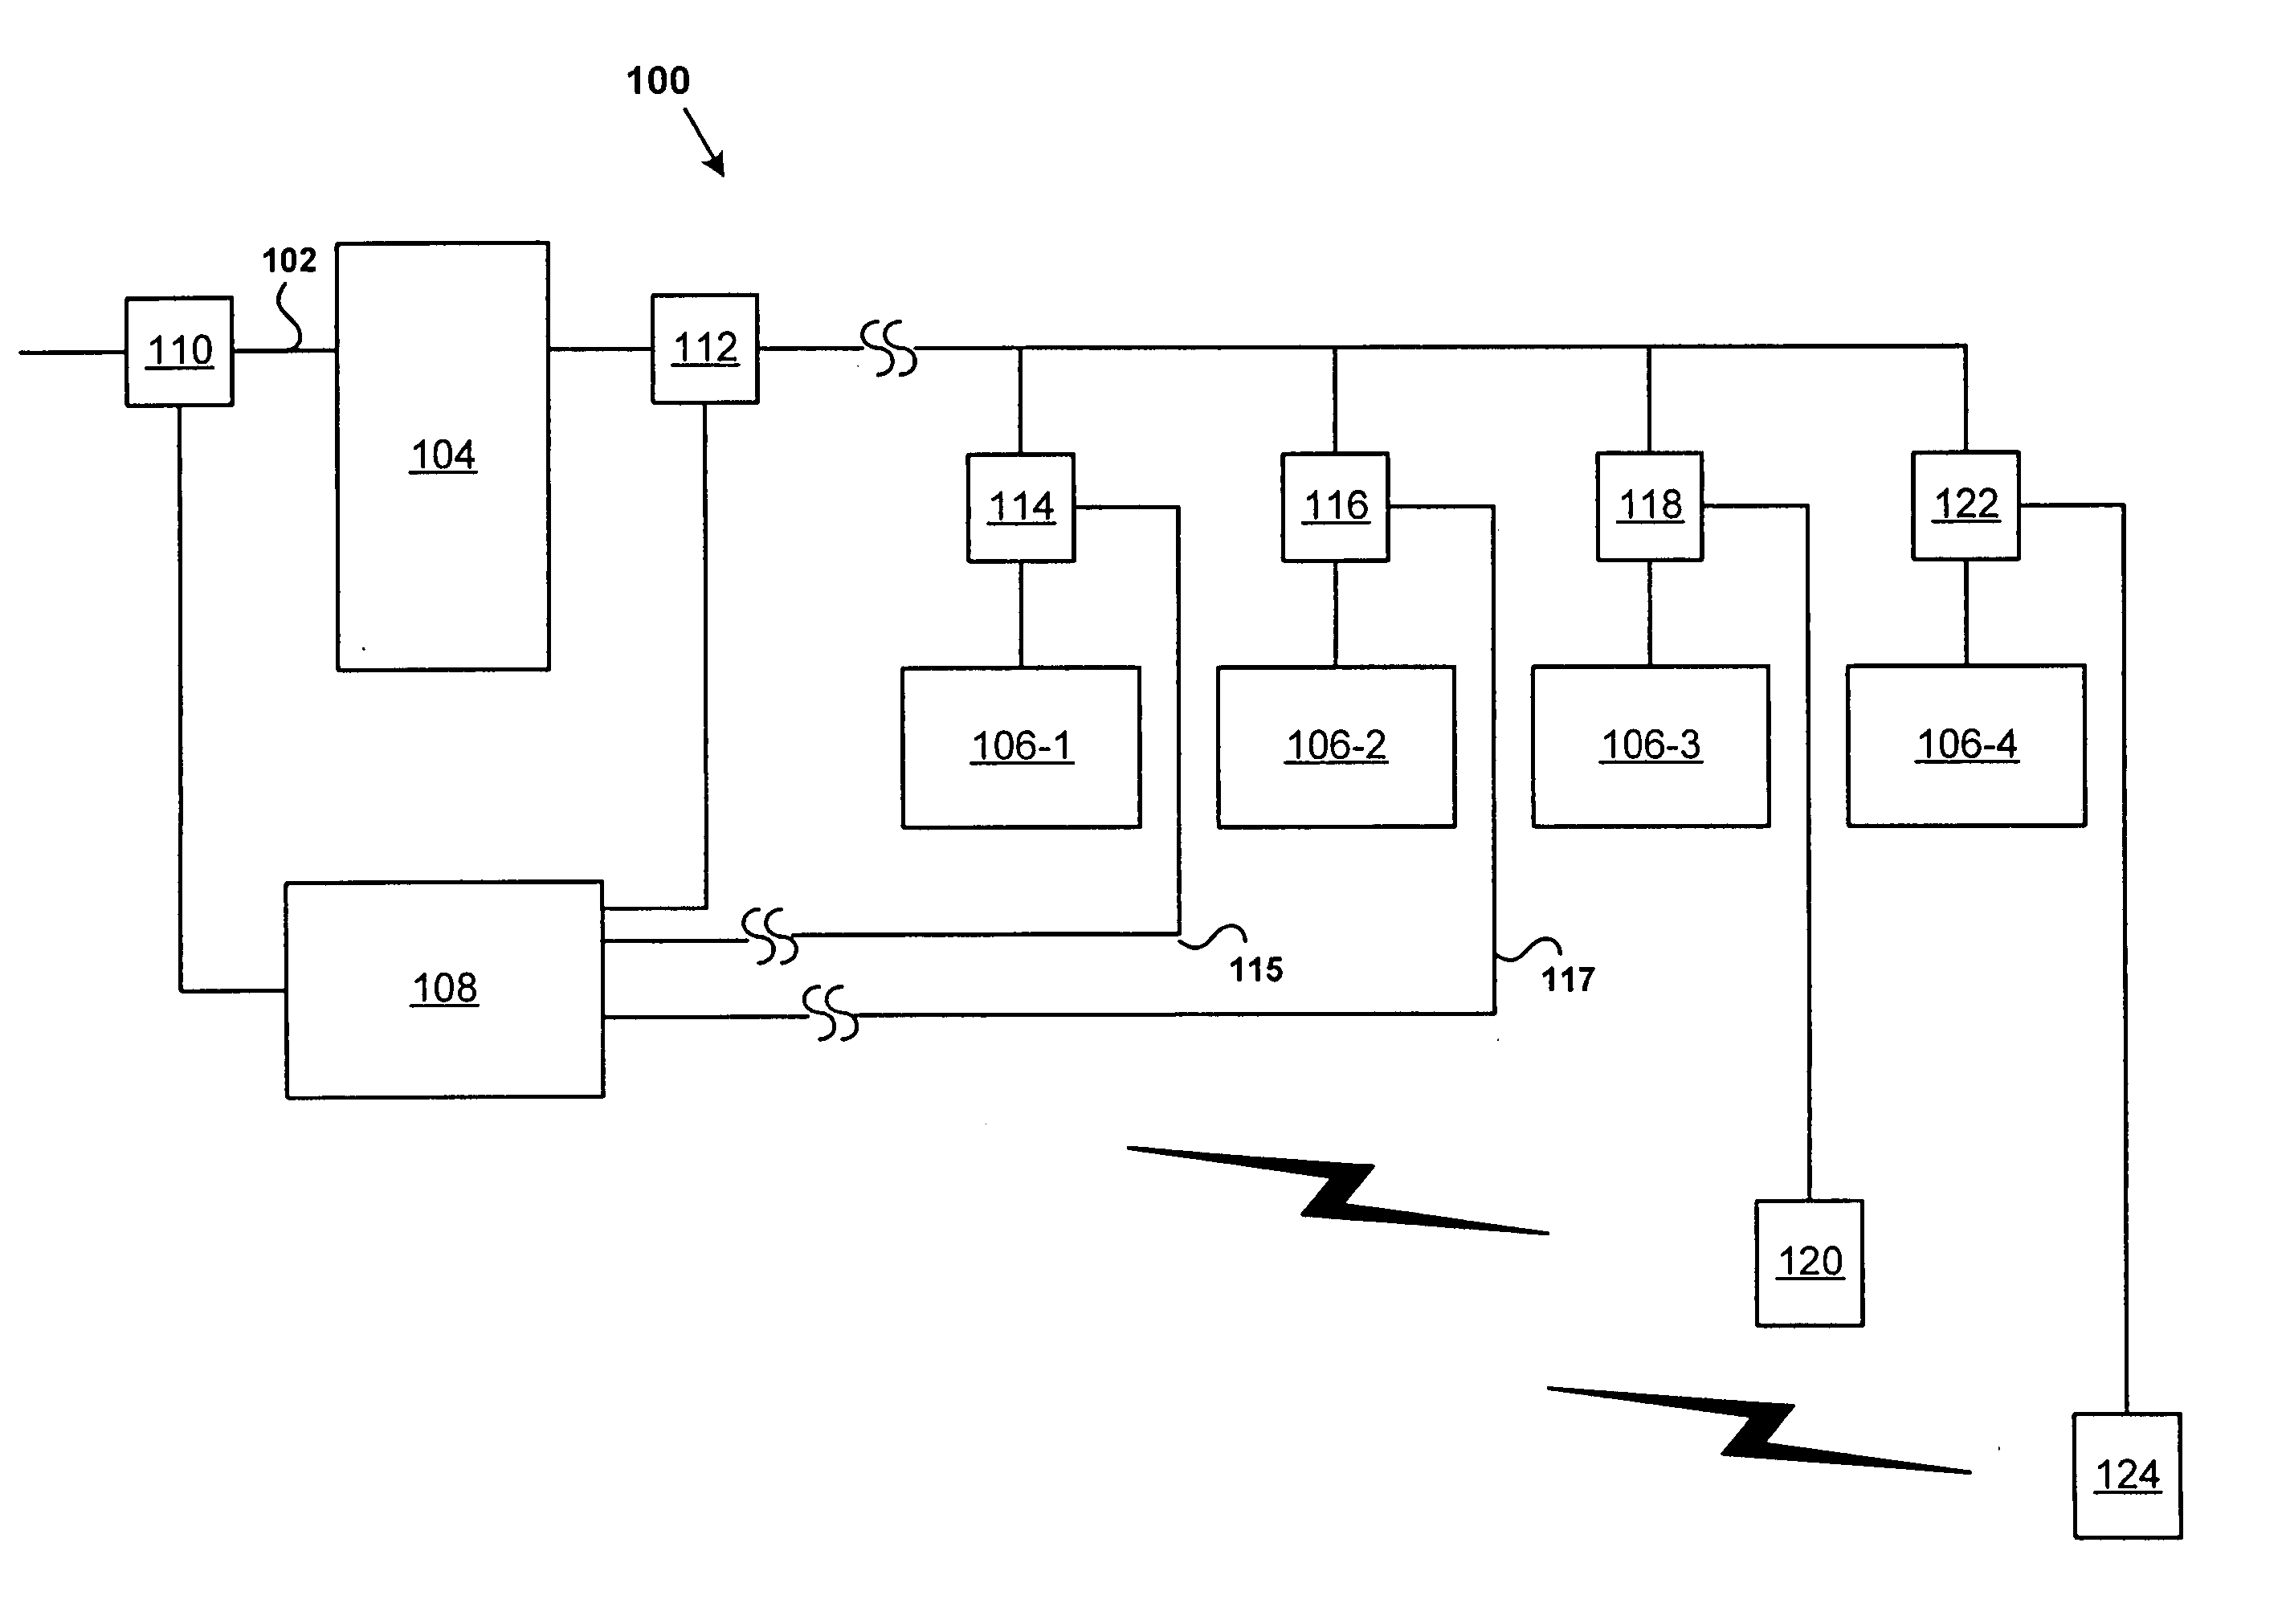 Remote electrical power monitoring systems and methods